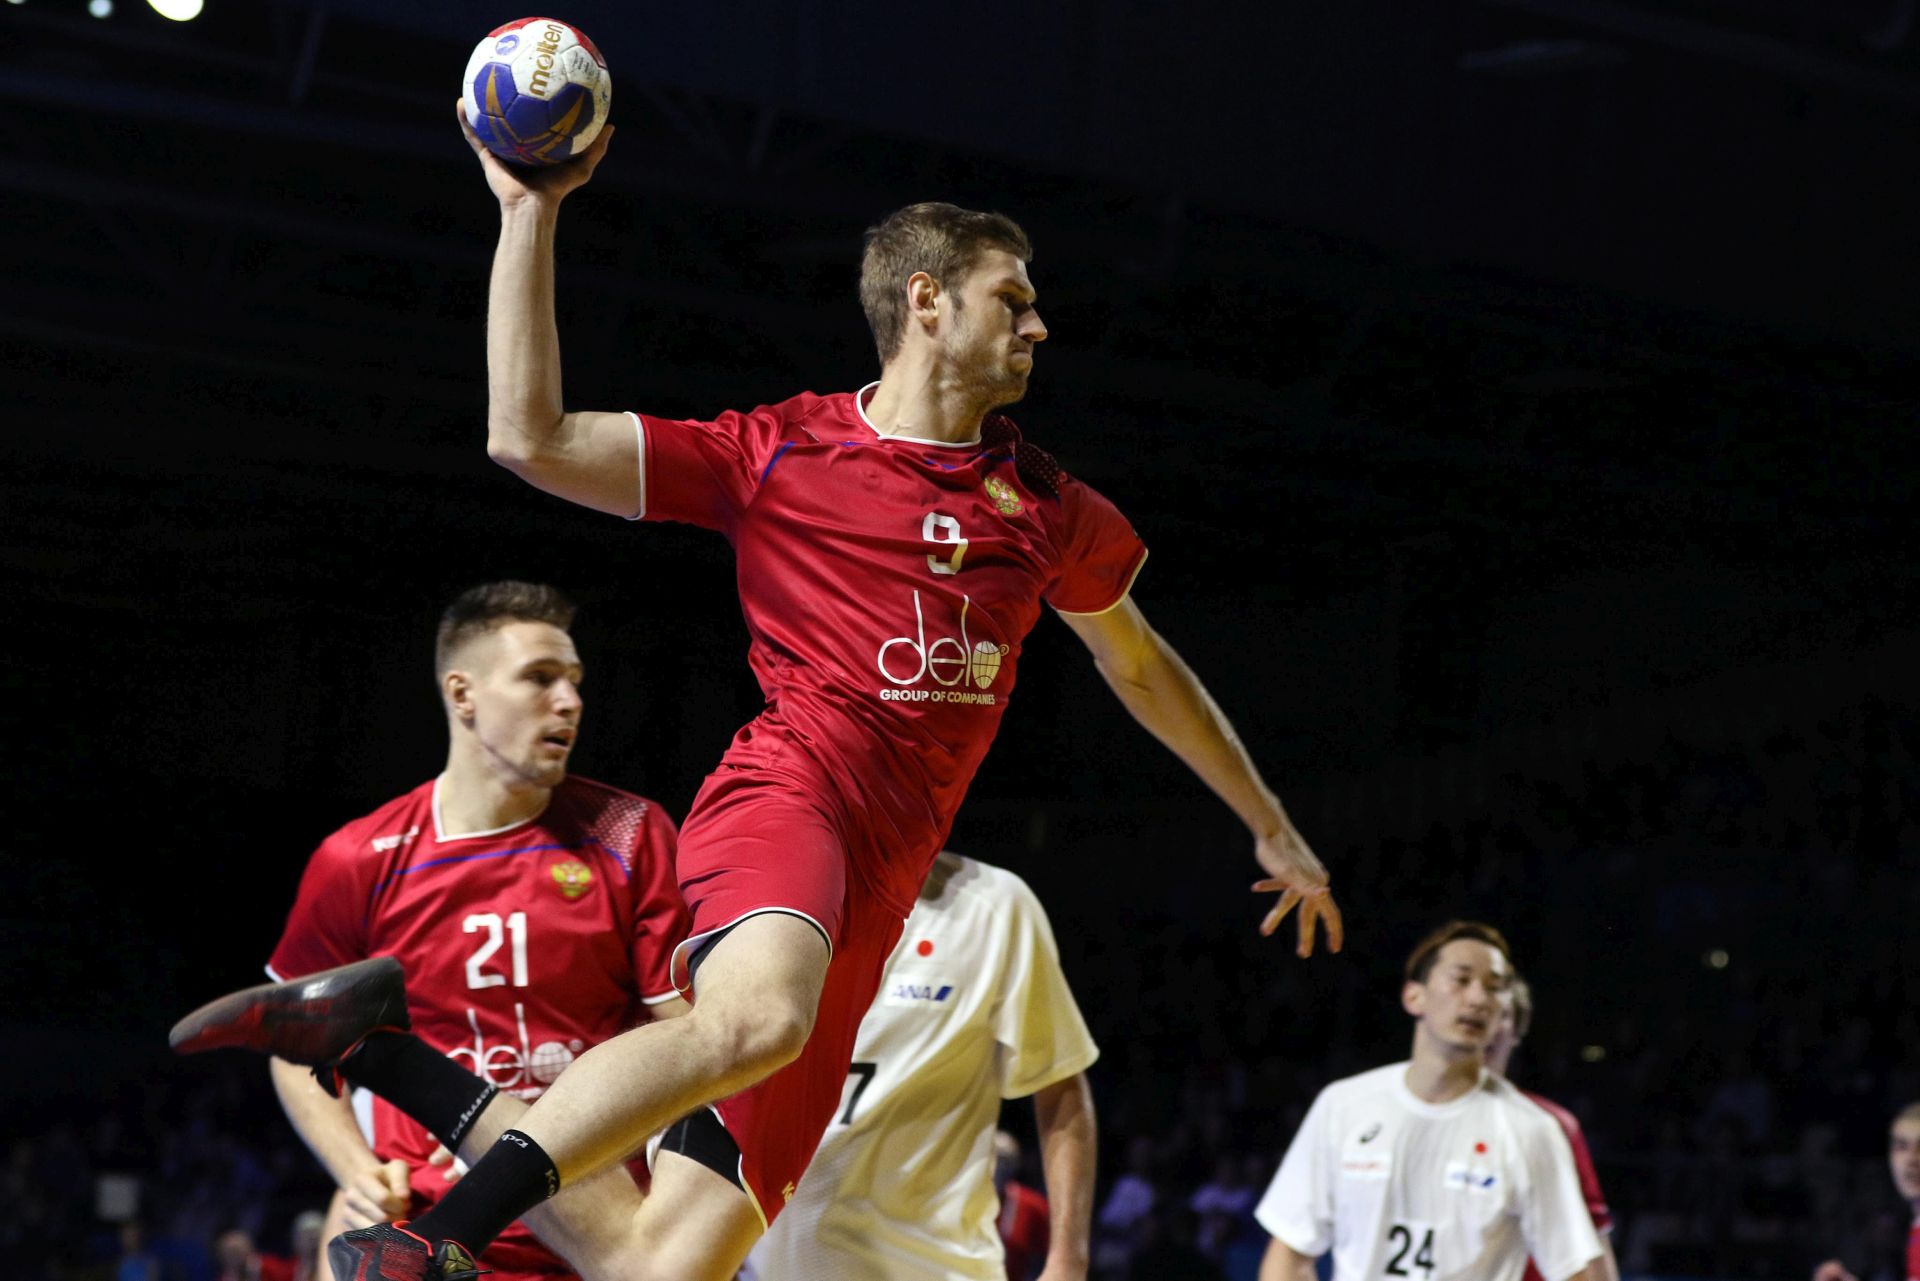 epa05713538 Russian player Alexander Shkurinskiy during the preliminary round match between Russia and Japan at the IHF Men's Handball World Championship, Nantes, France, 12 January 2017.  EPA/EDDY LEMAISTRE